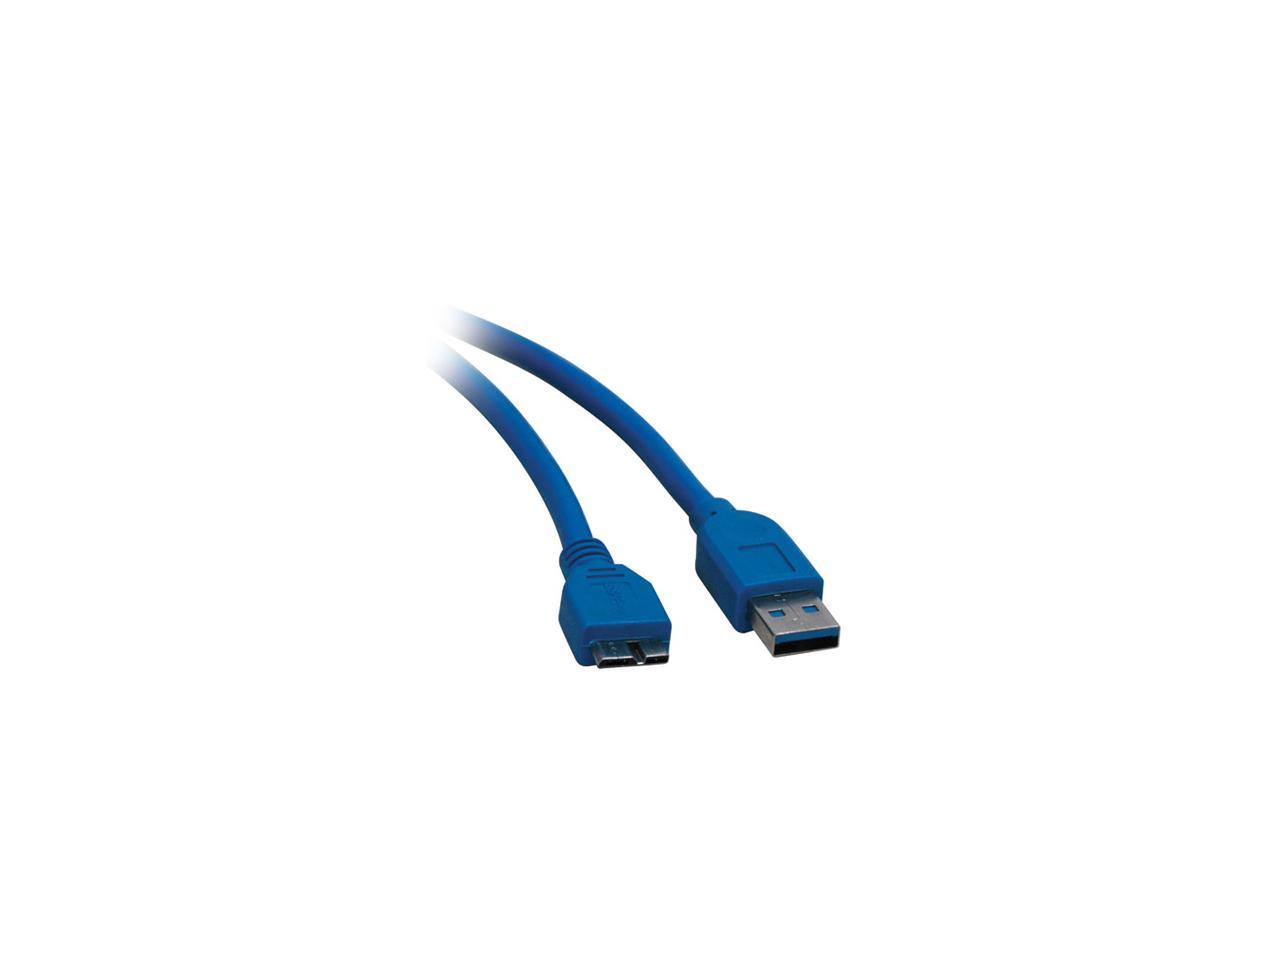 Tripp Lite U326-003 Blue USB 3.0 Super Speed Device cable (A Male to Micro - B Male) - image 3 of 3